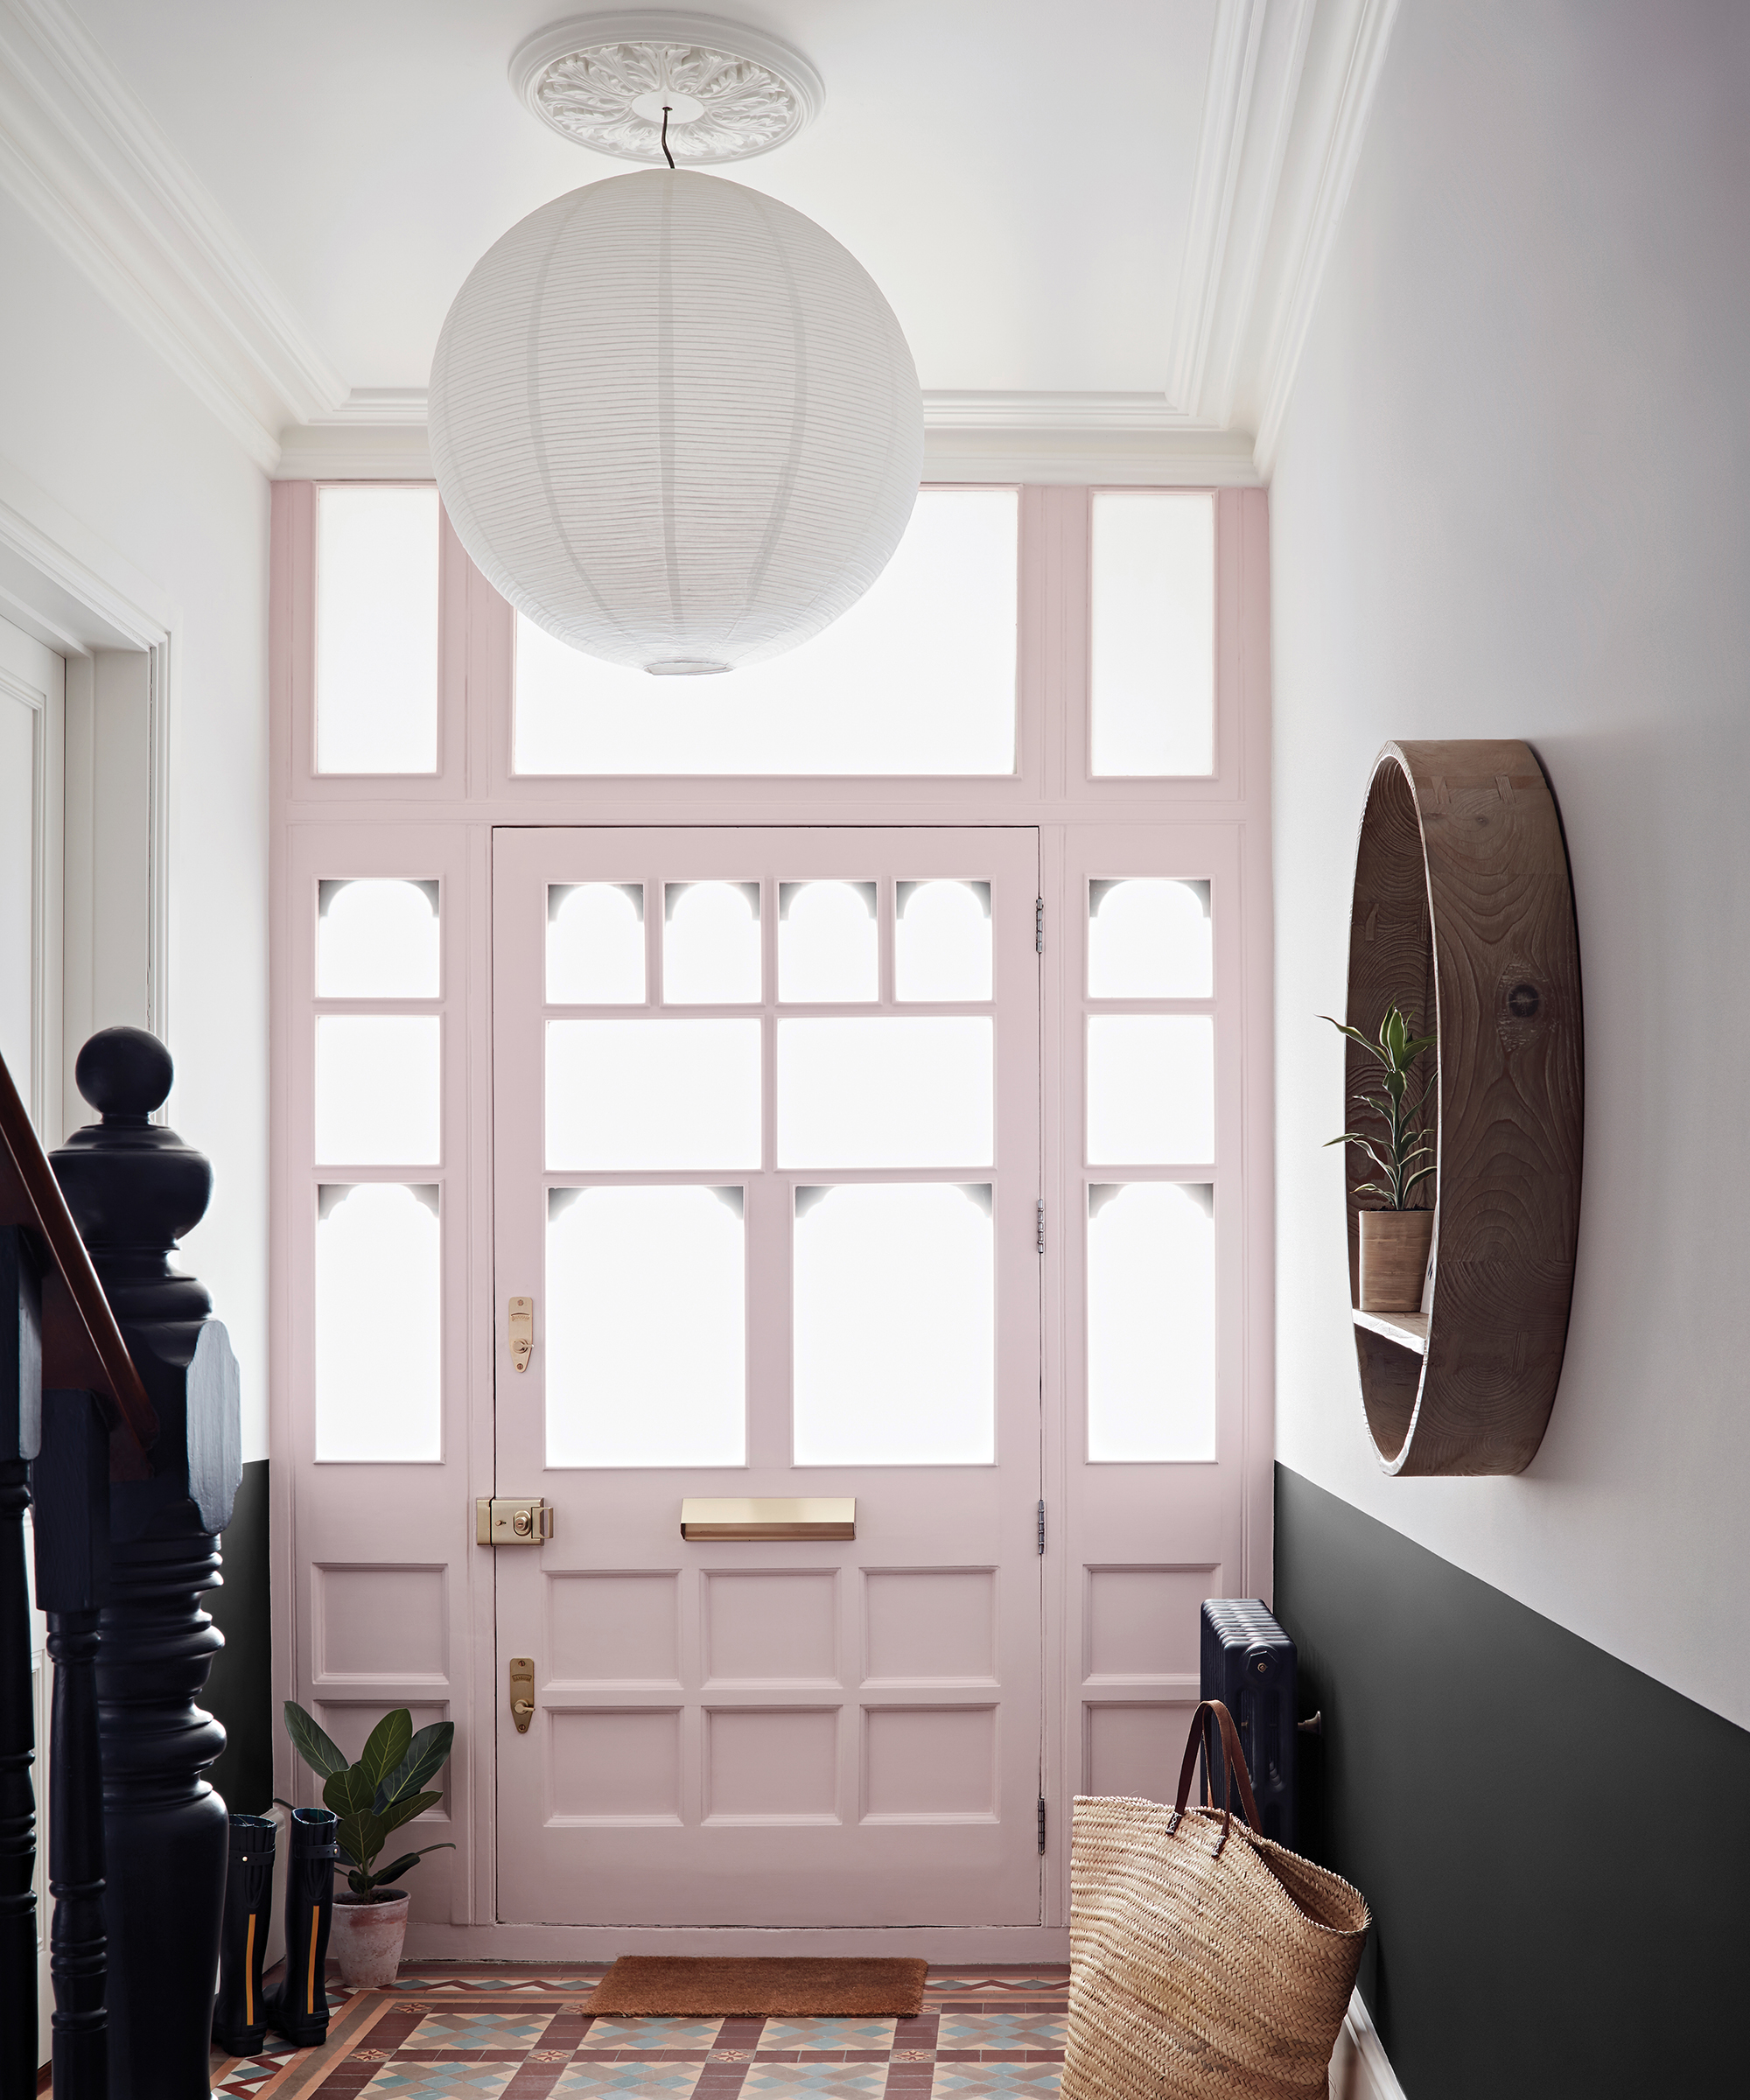 Hallway ideas by using pink door decor in shade Creme de la Rose, Matt Emulsion, from £14 for 2.5L and Rebel, Feature Wall Paint, from £14.50 for 1.25L